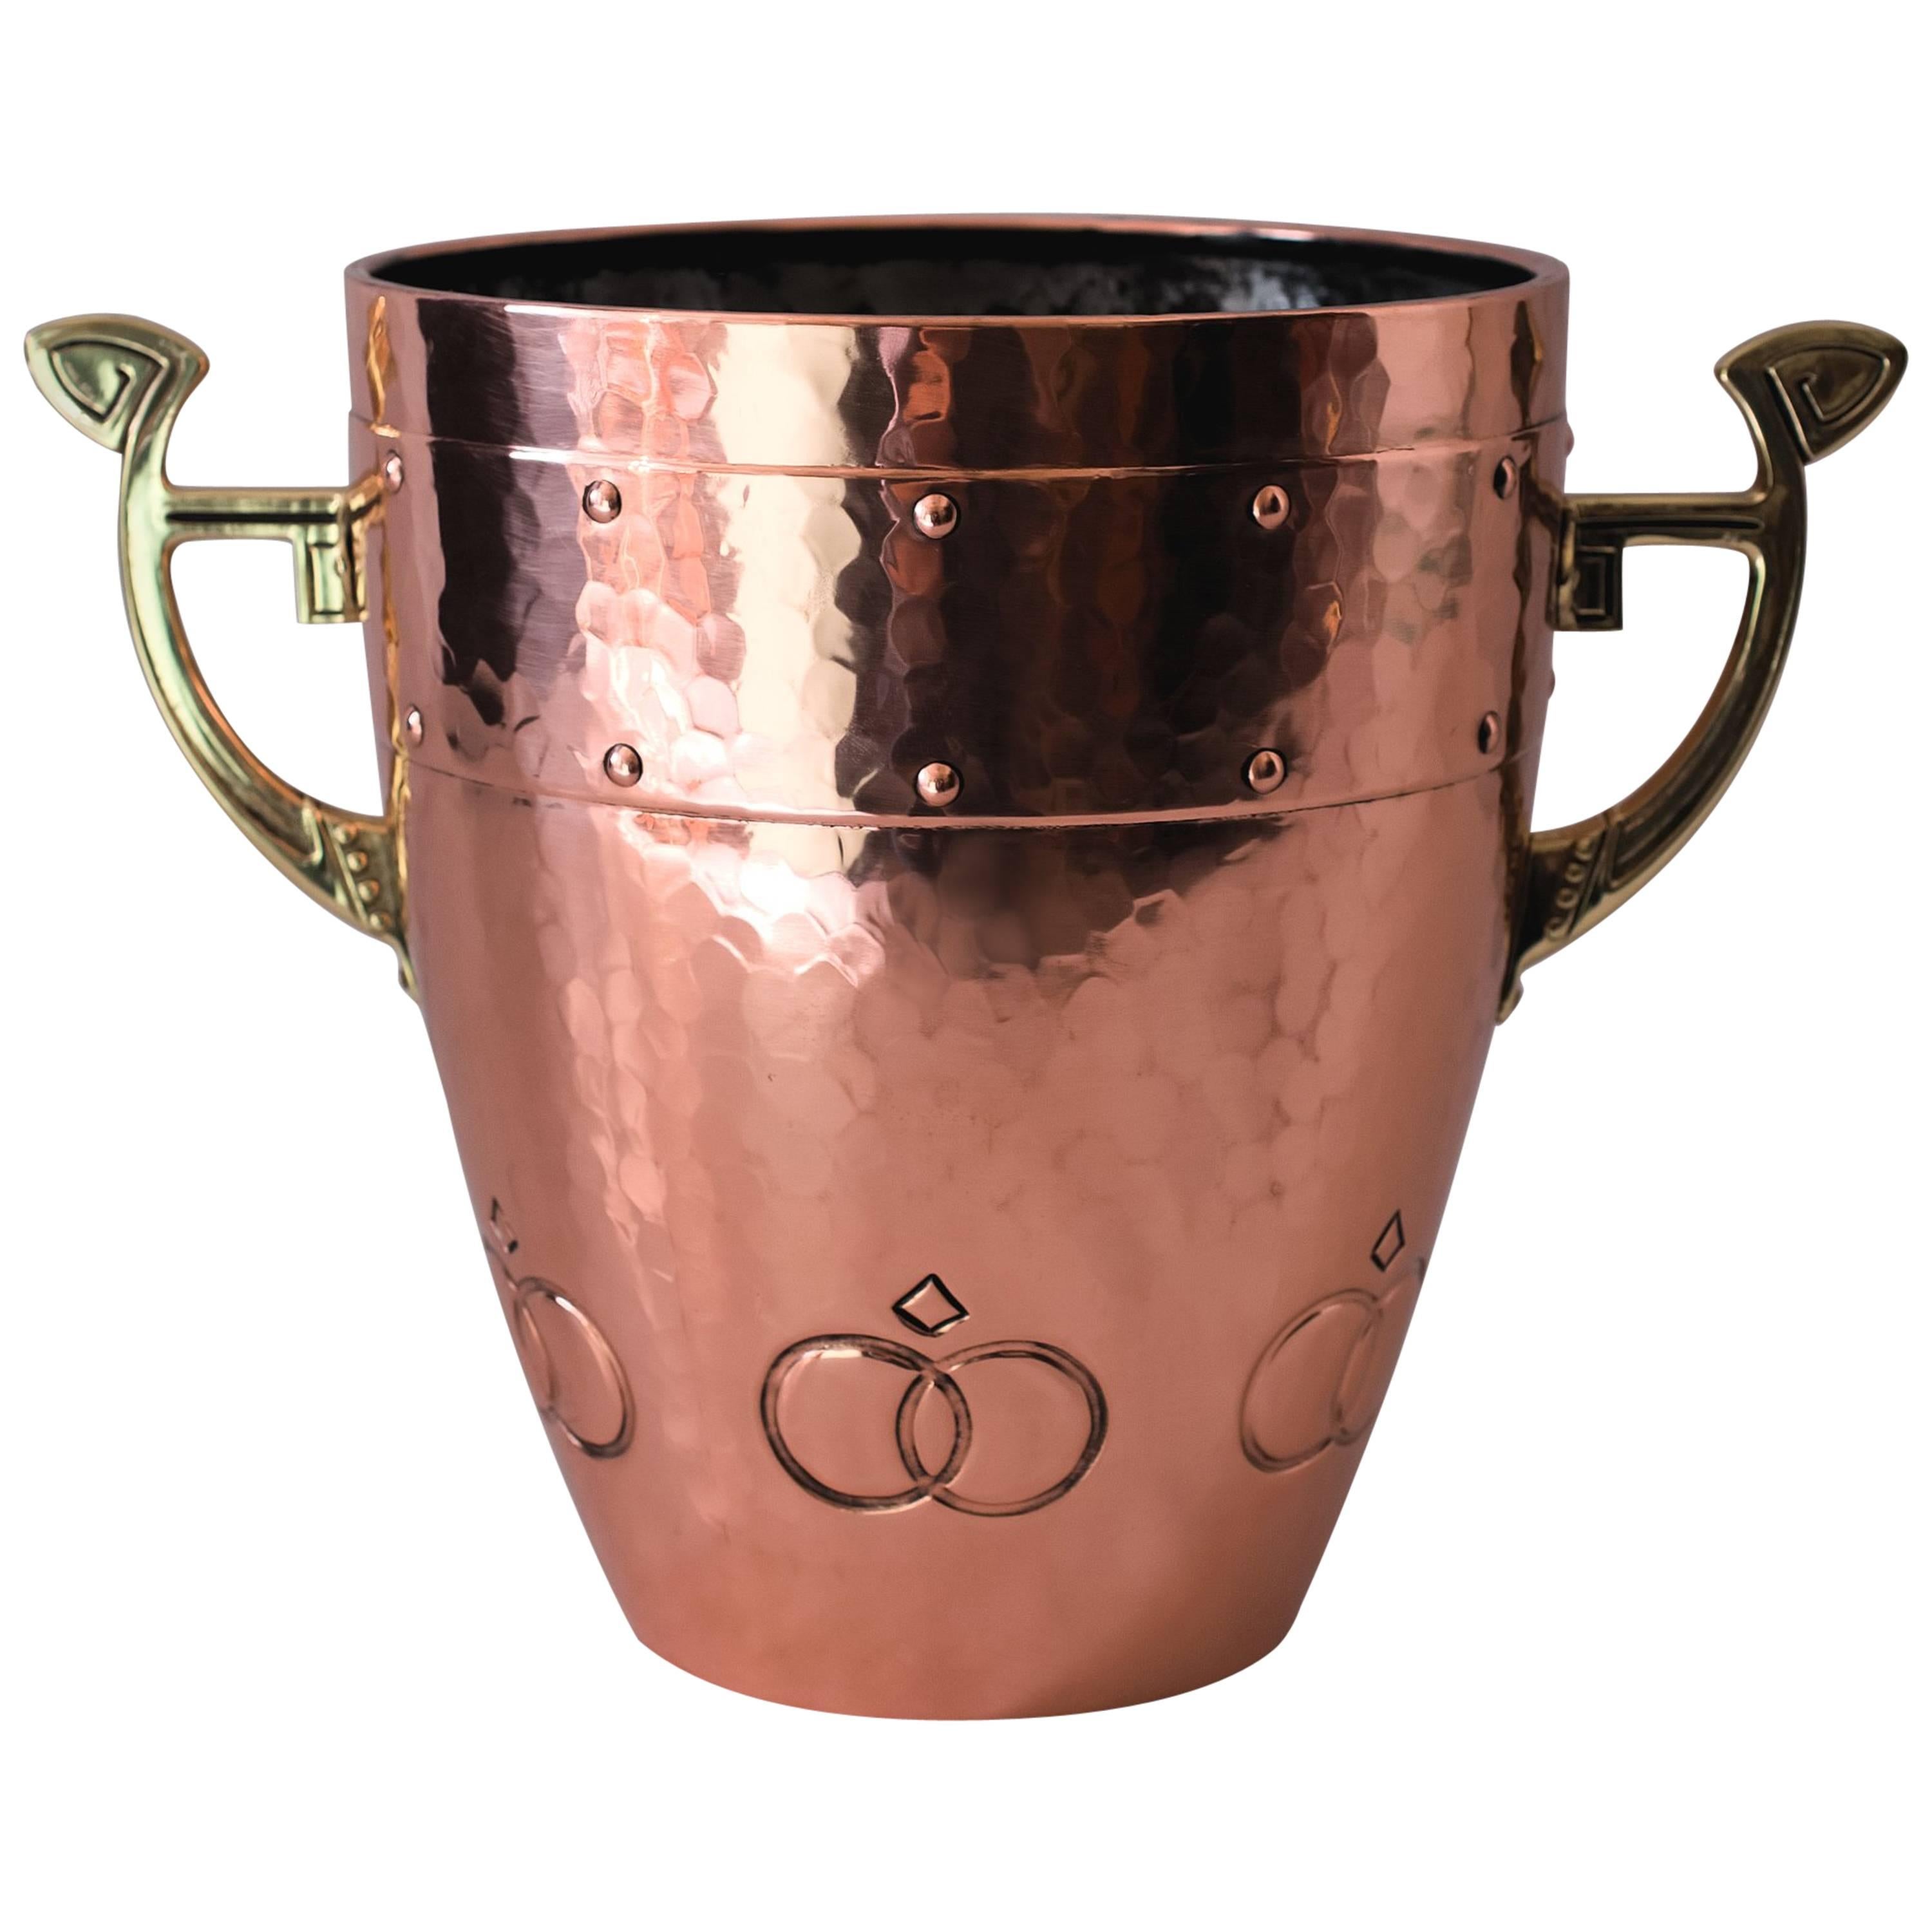 WMF Palm Pot Hammered Copper and Brass